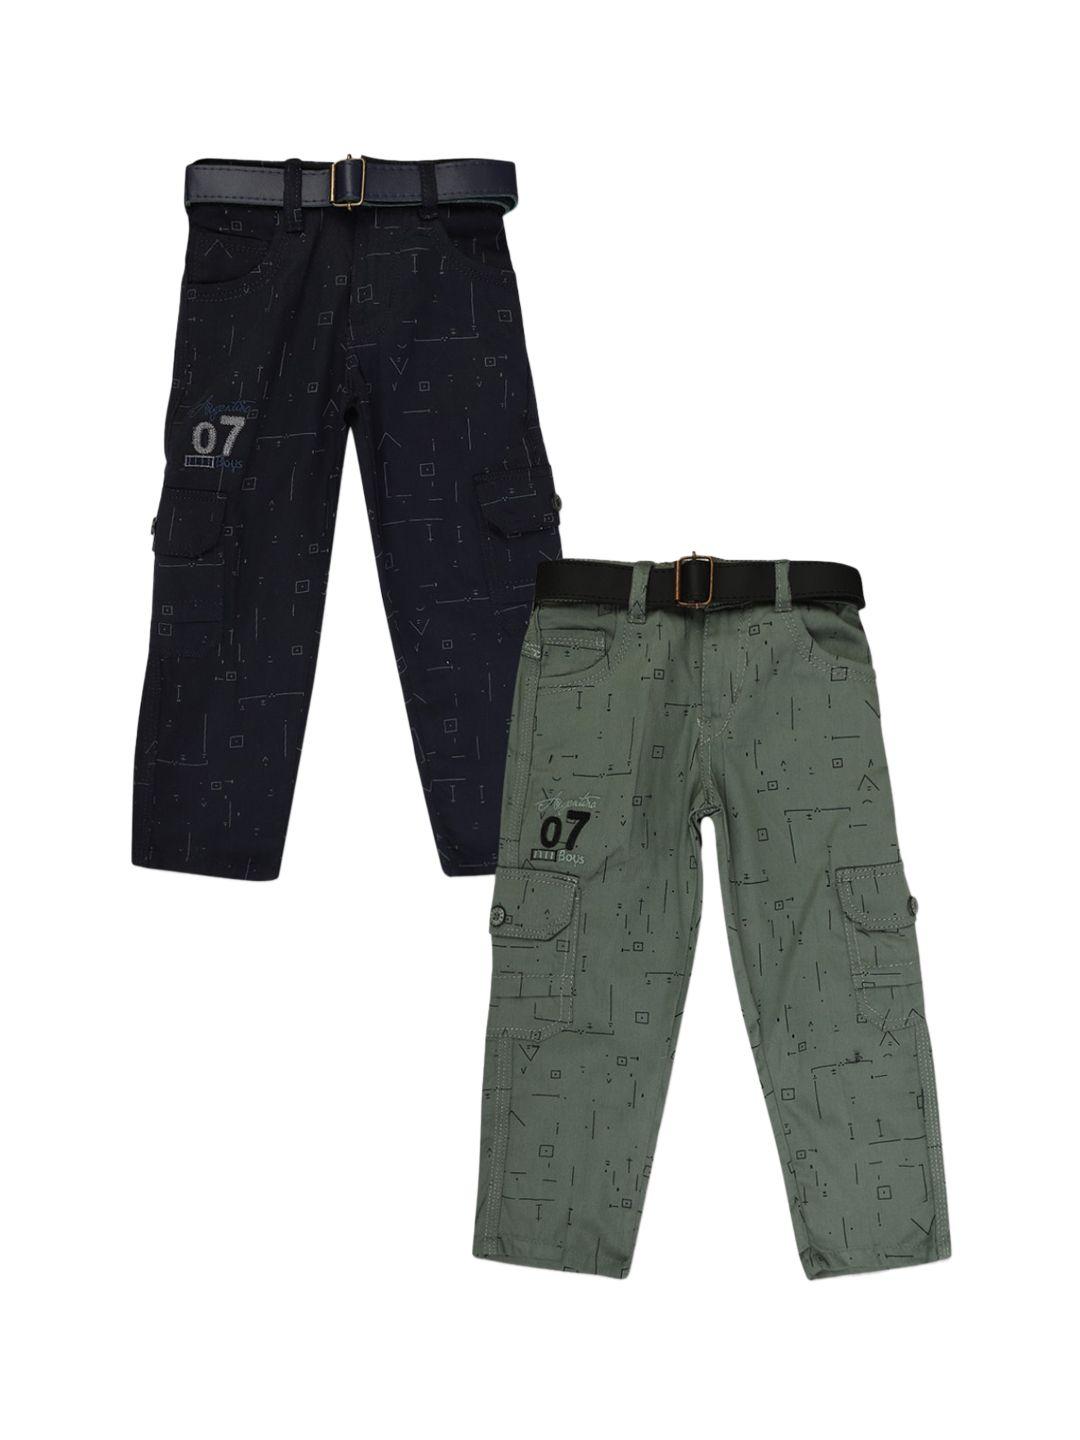 v-mart boys pack of 2 printed cargos trousers